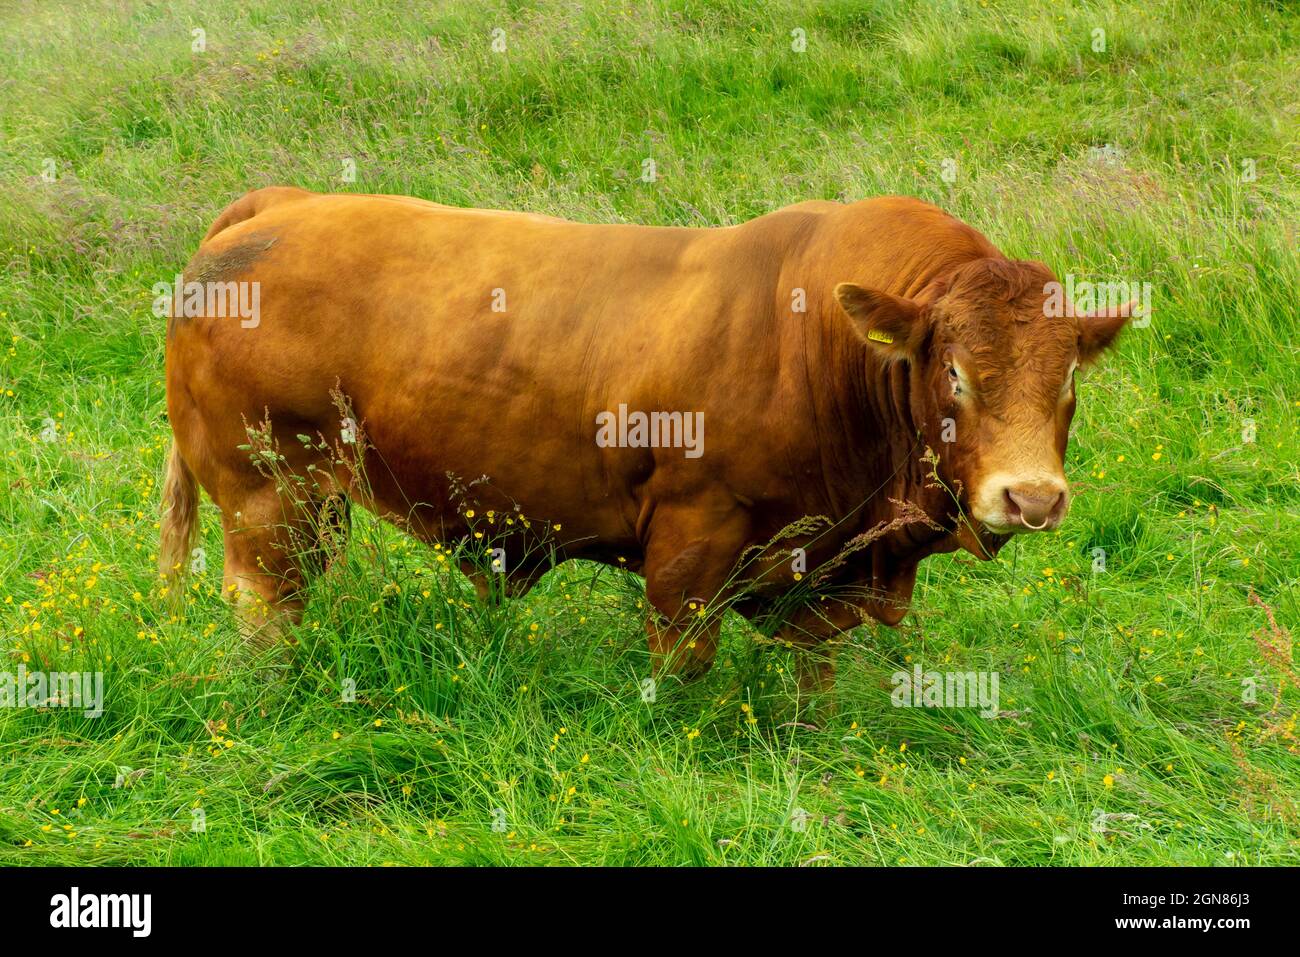 Limousin bull a breed of beef cattle originally from the Limousin and Marche regions of France. Stock Photo